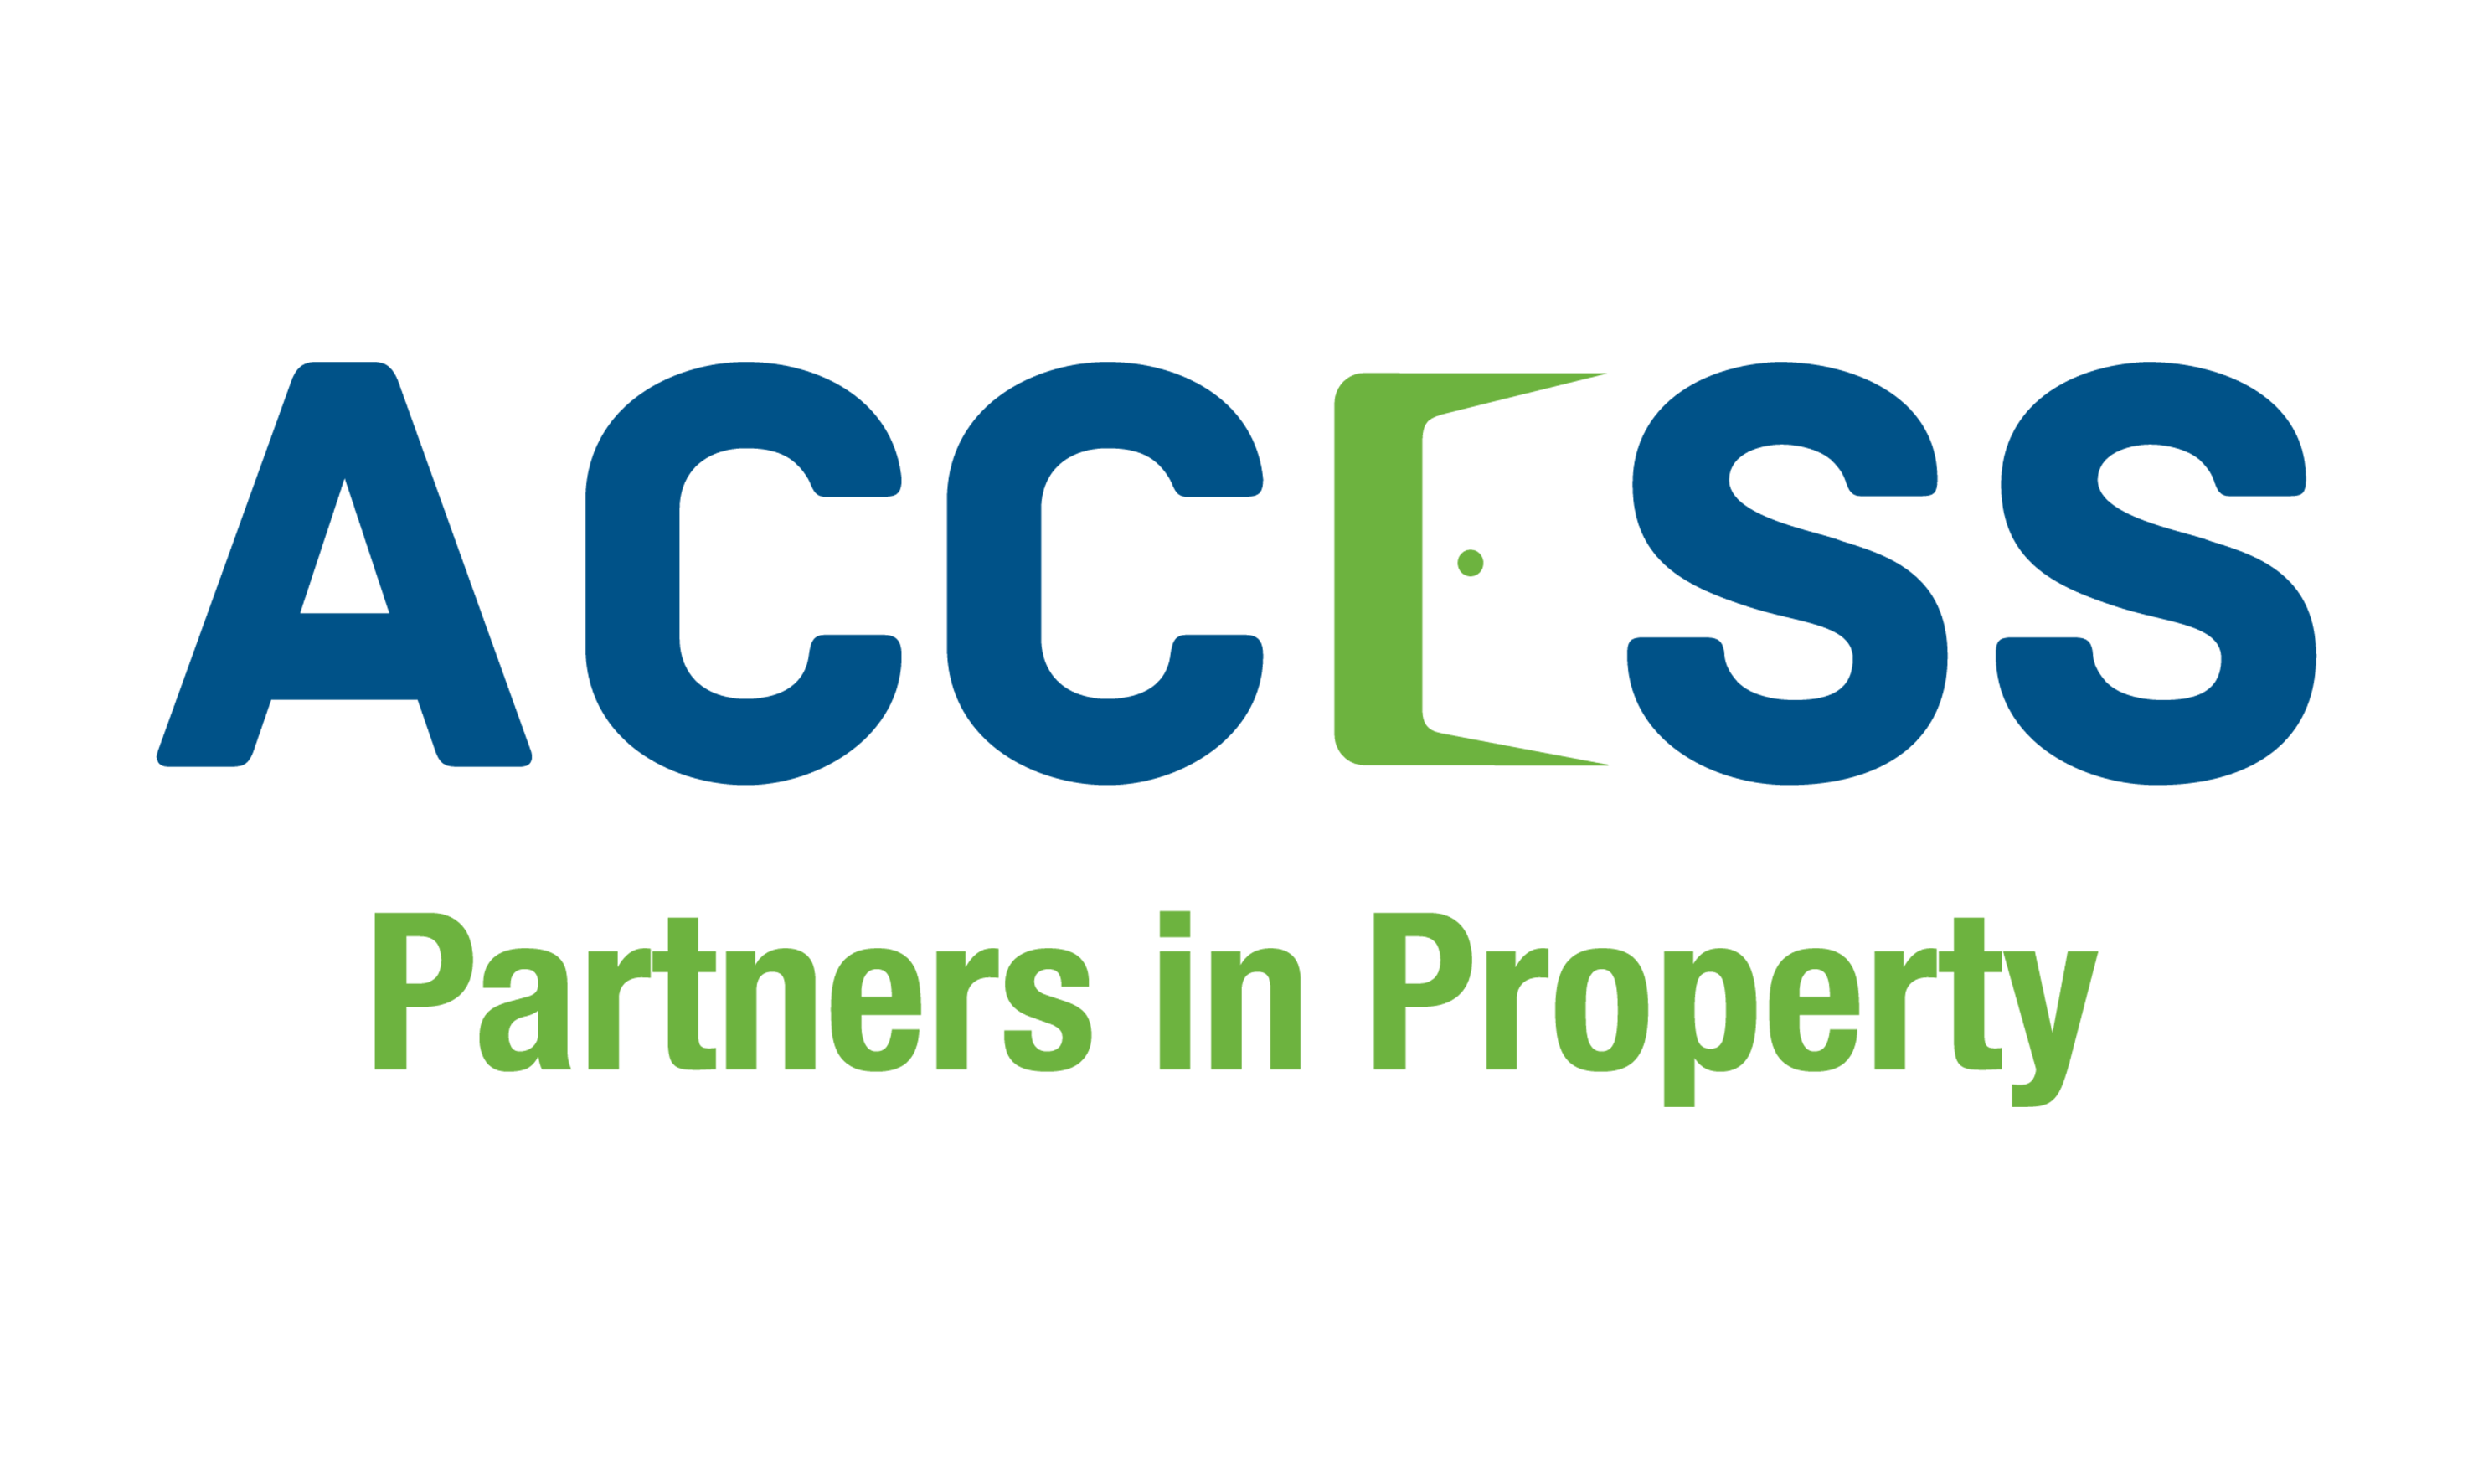 Access Property